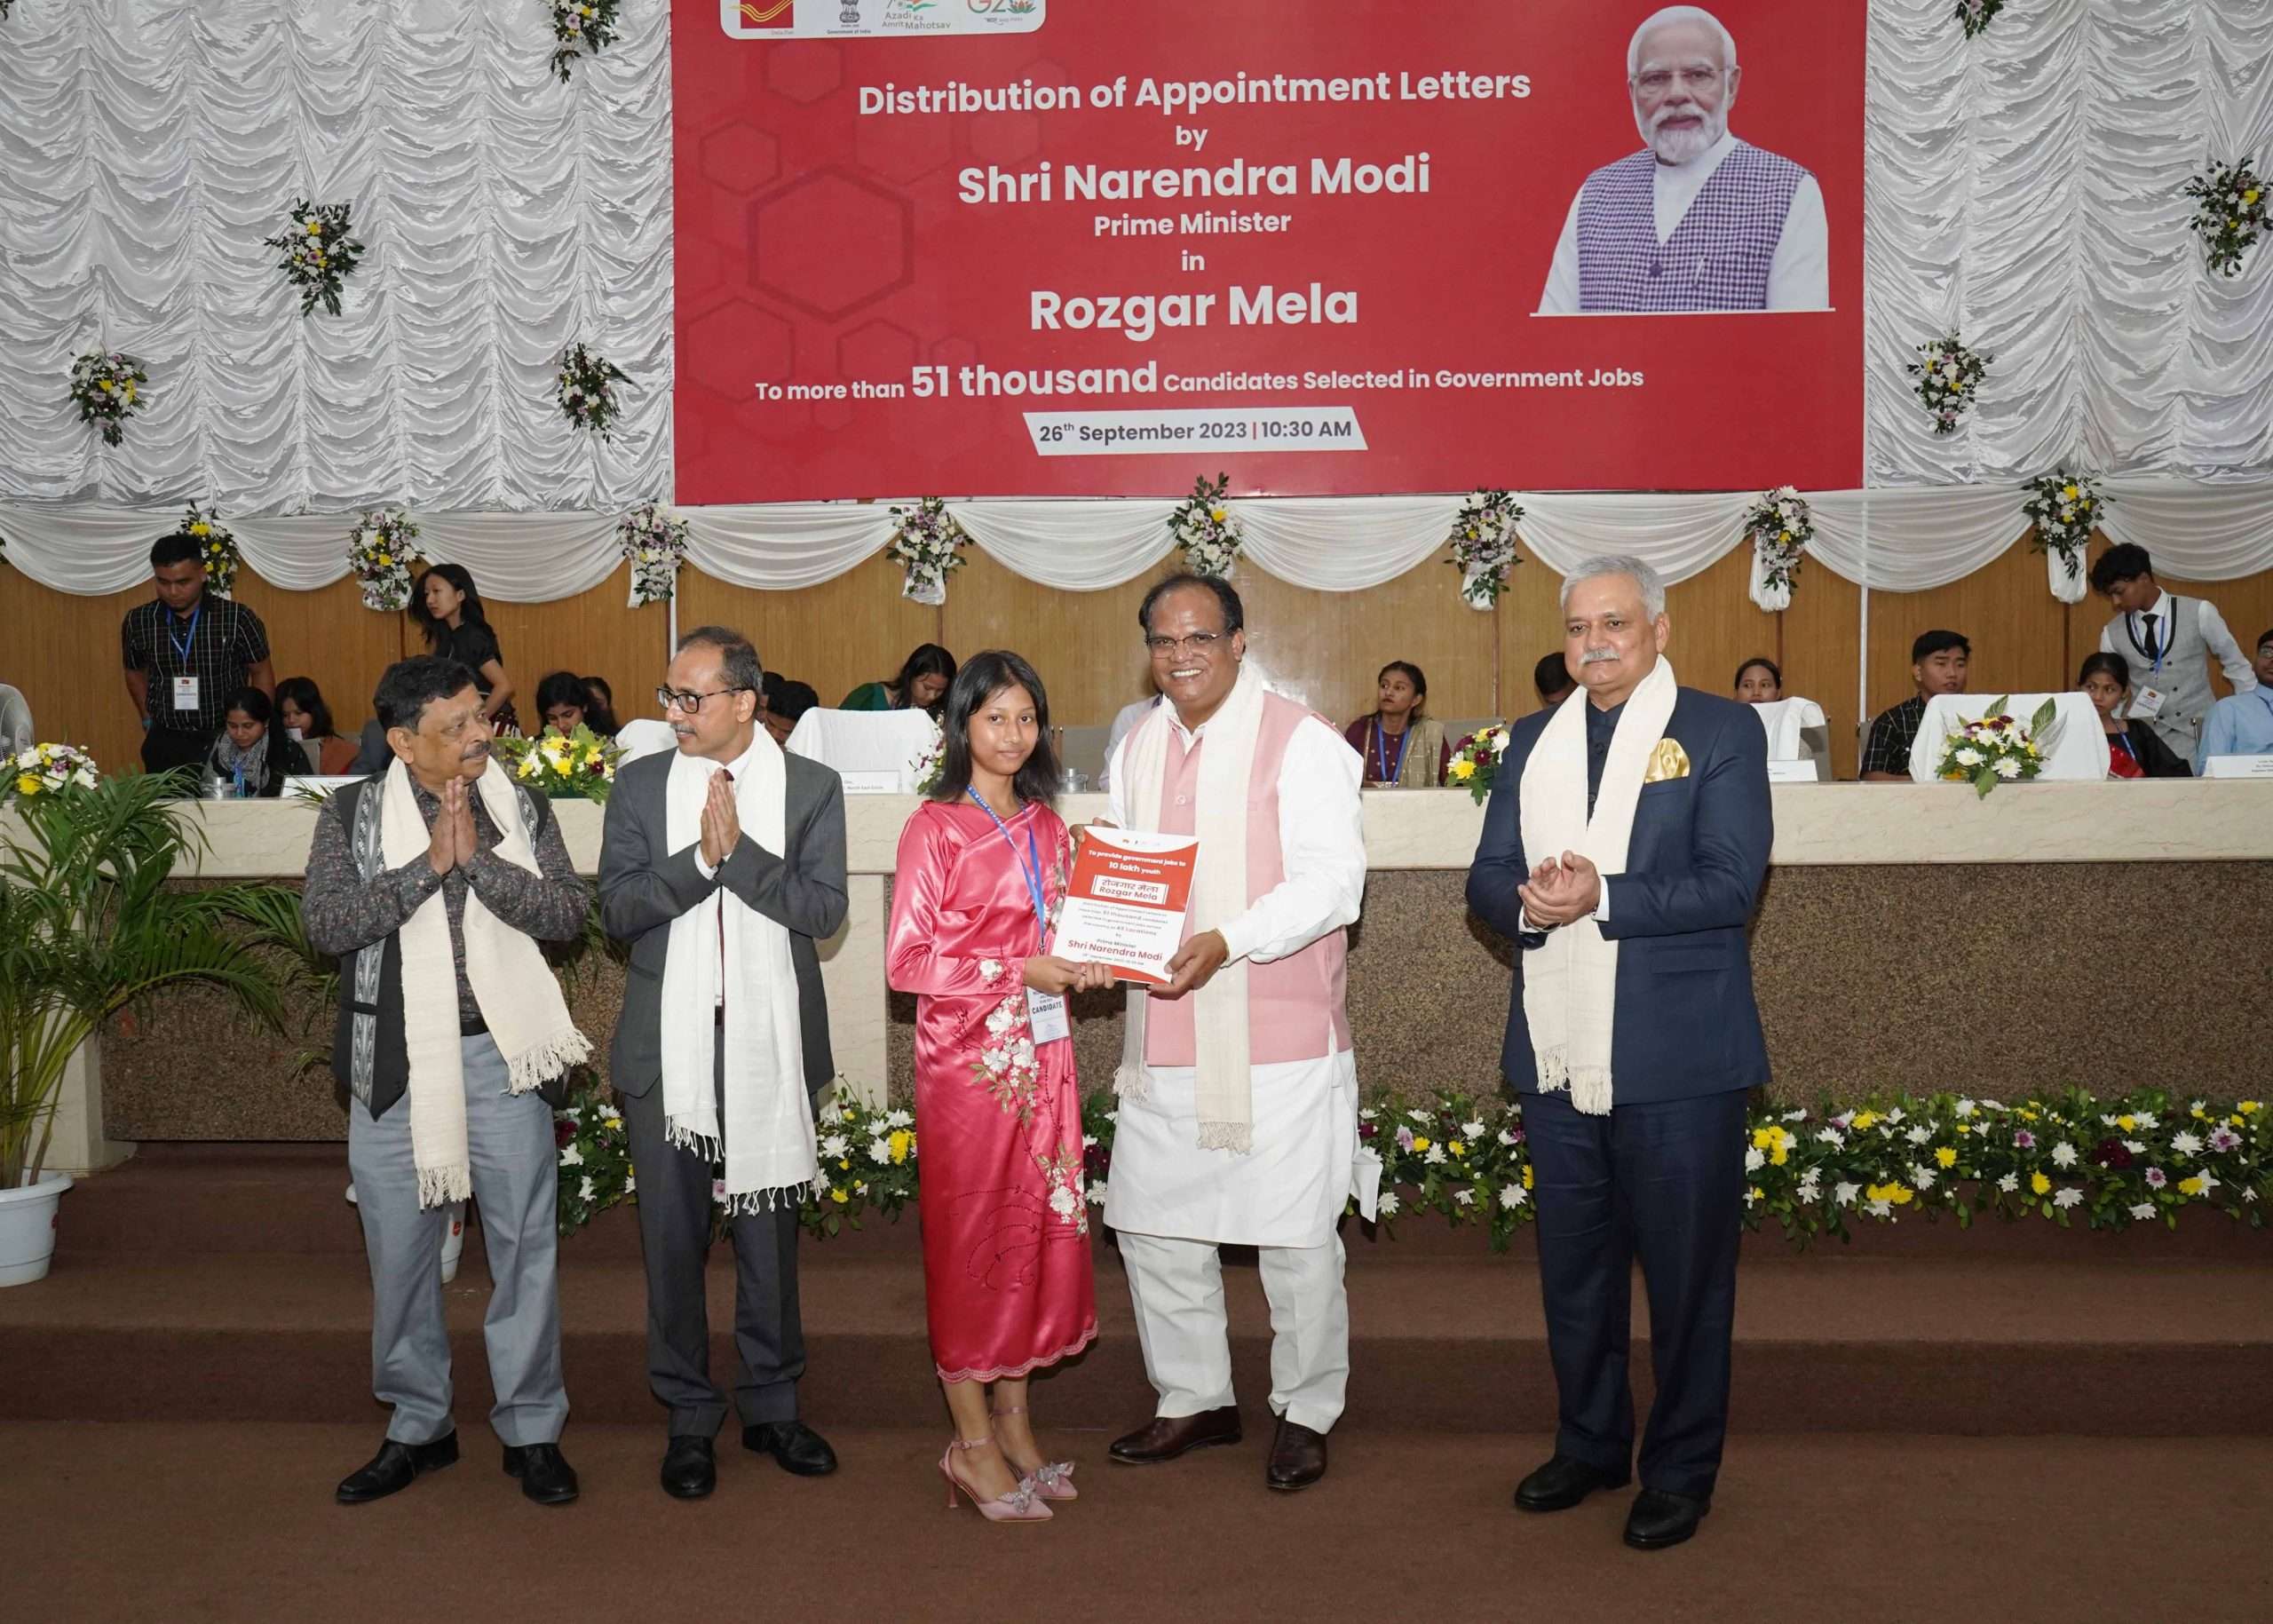 126 candidates from Meghalaya receive appointment letter in Rozgar Mela in Shillong